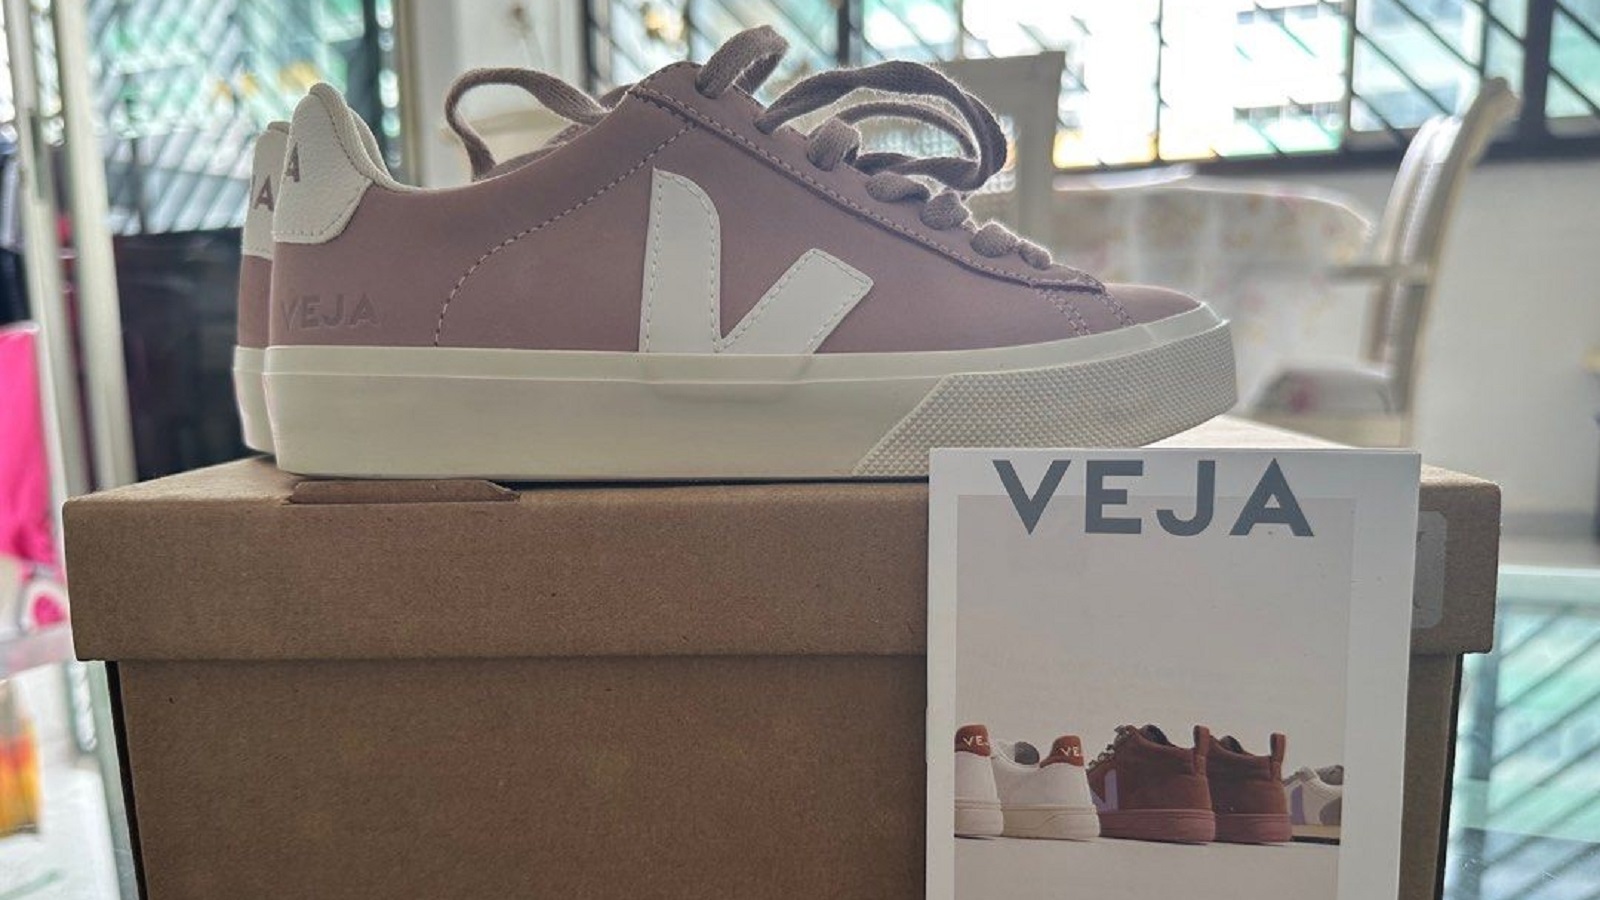 Veja Sneakers Review: Are They Really Eco-Conscious and High-Quality Footwear?